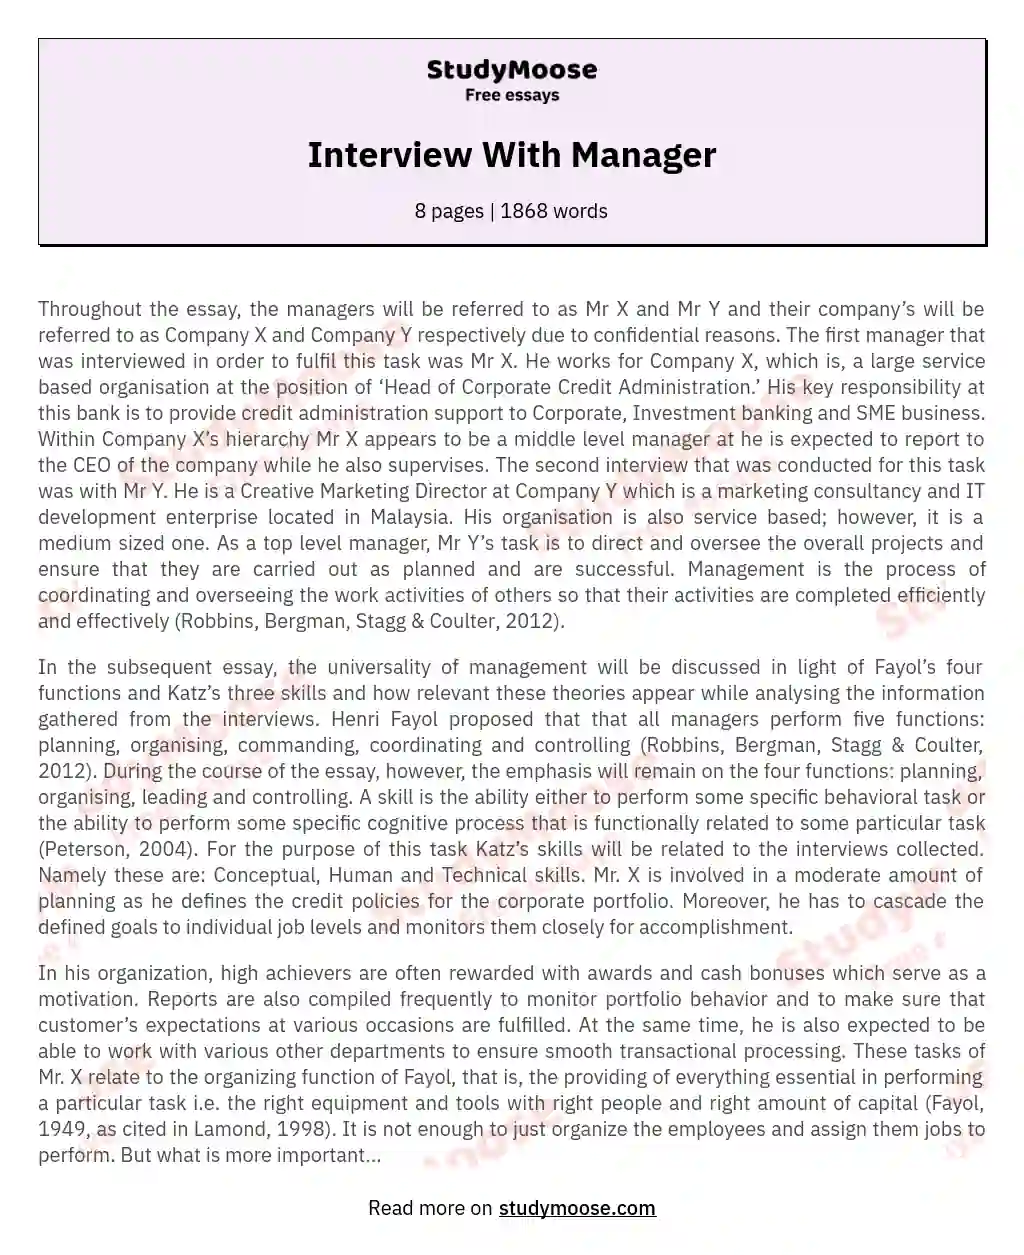 Interview With Manager essay